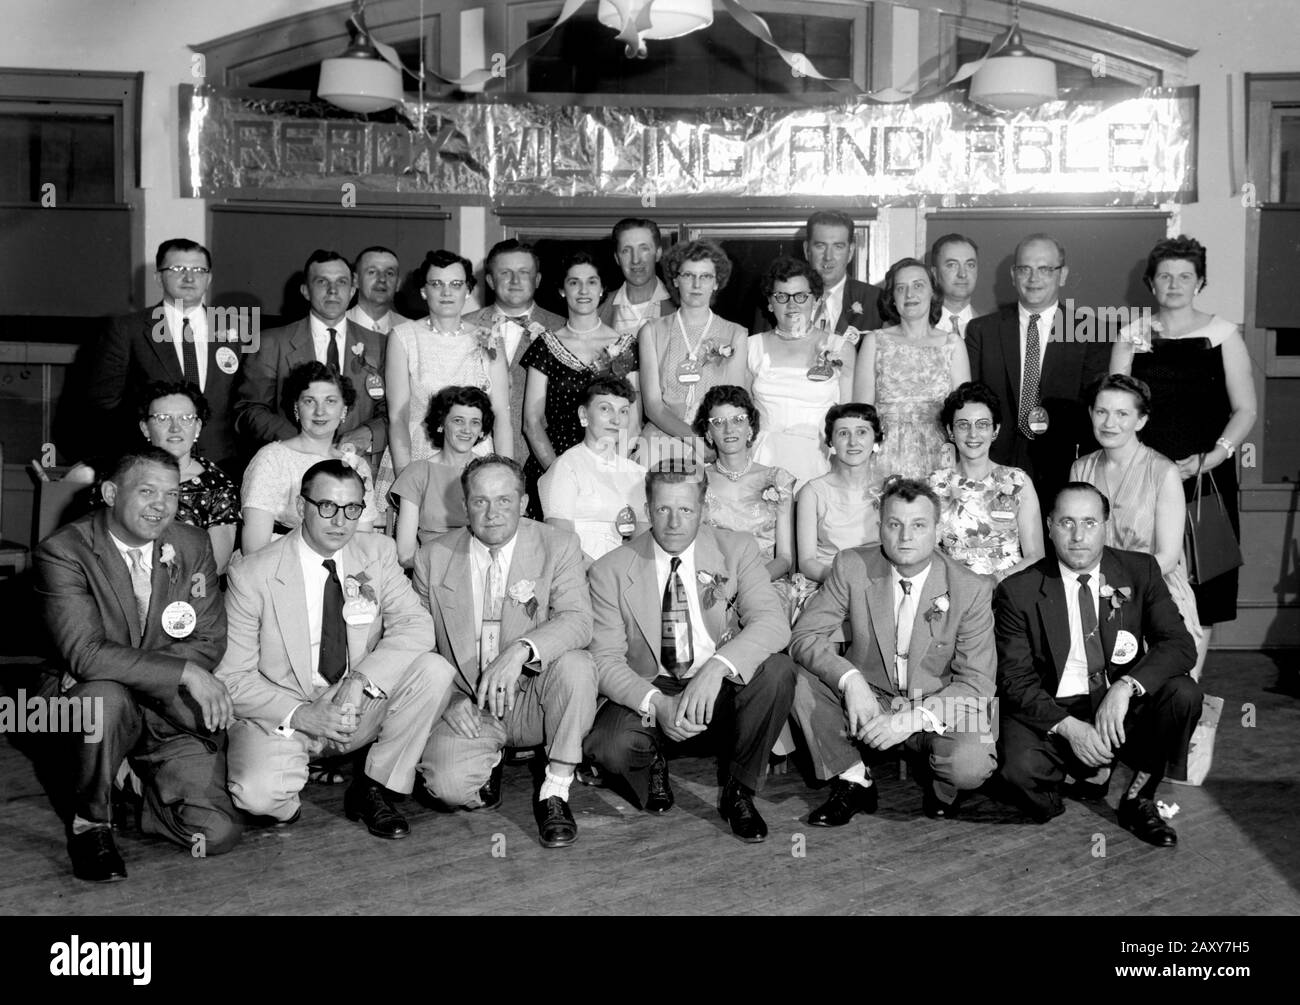 Class reunion photo. Ready, willing and able. ca. 1960. Stock Photo